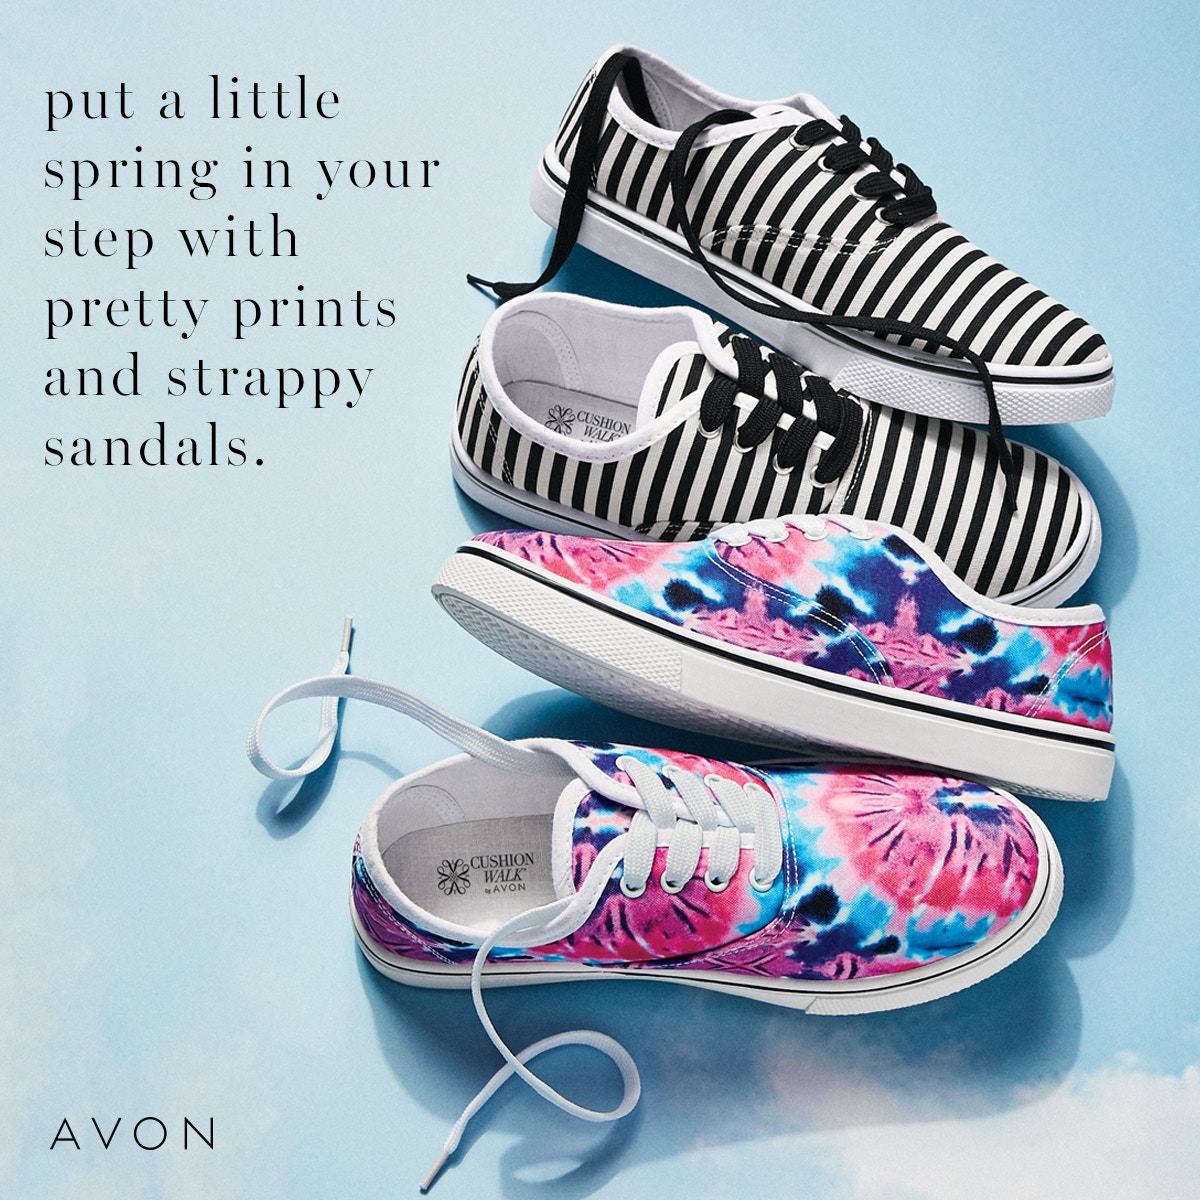 Put a little #spring into your step with these cute #sneakers, complete with pretty printed fabric and a #CushionWalk footbed for maximum comfort. #BossUp #comfort go.youravon.com/3k6r28